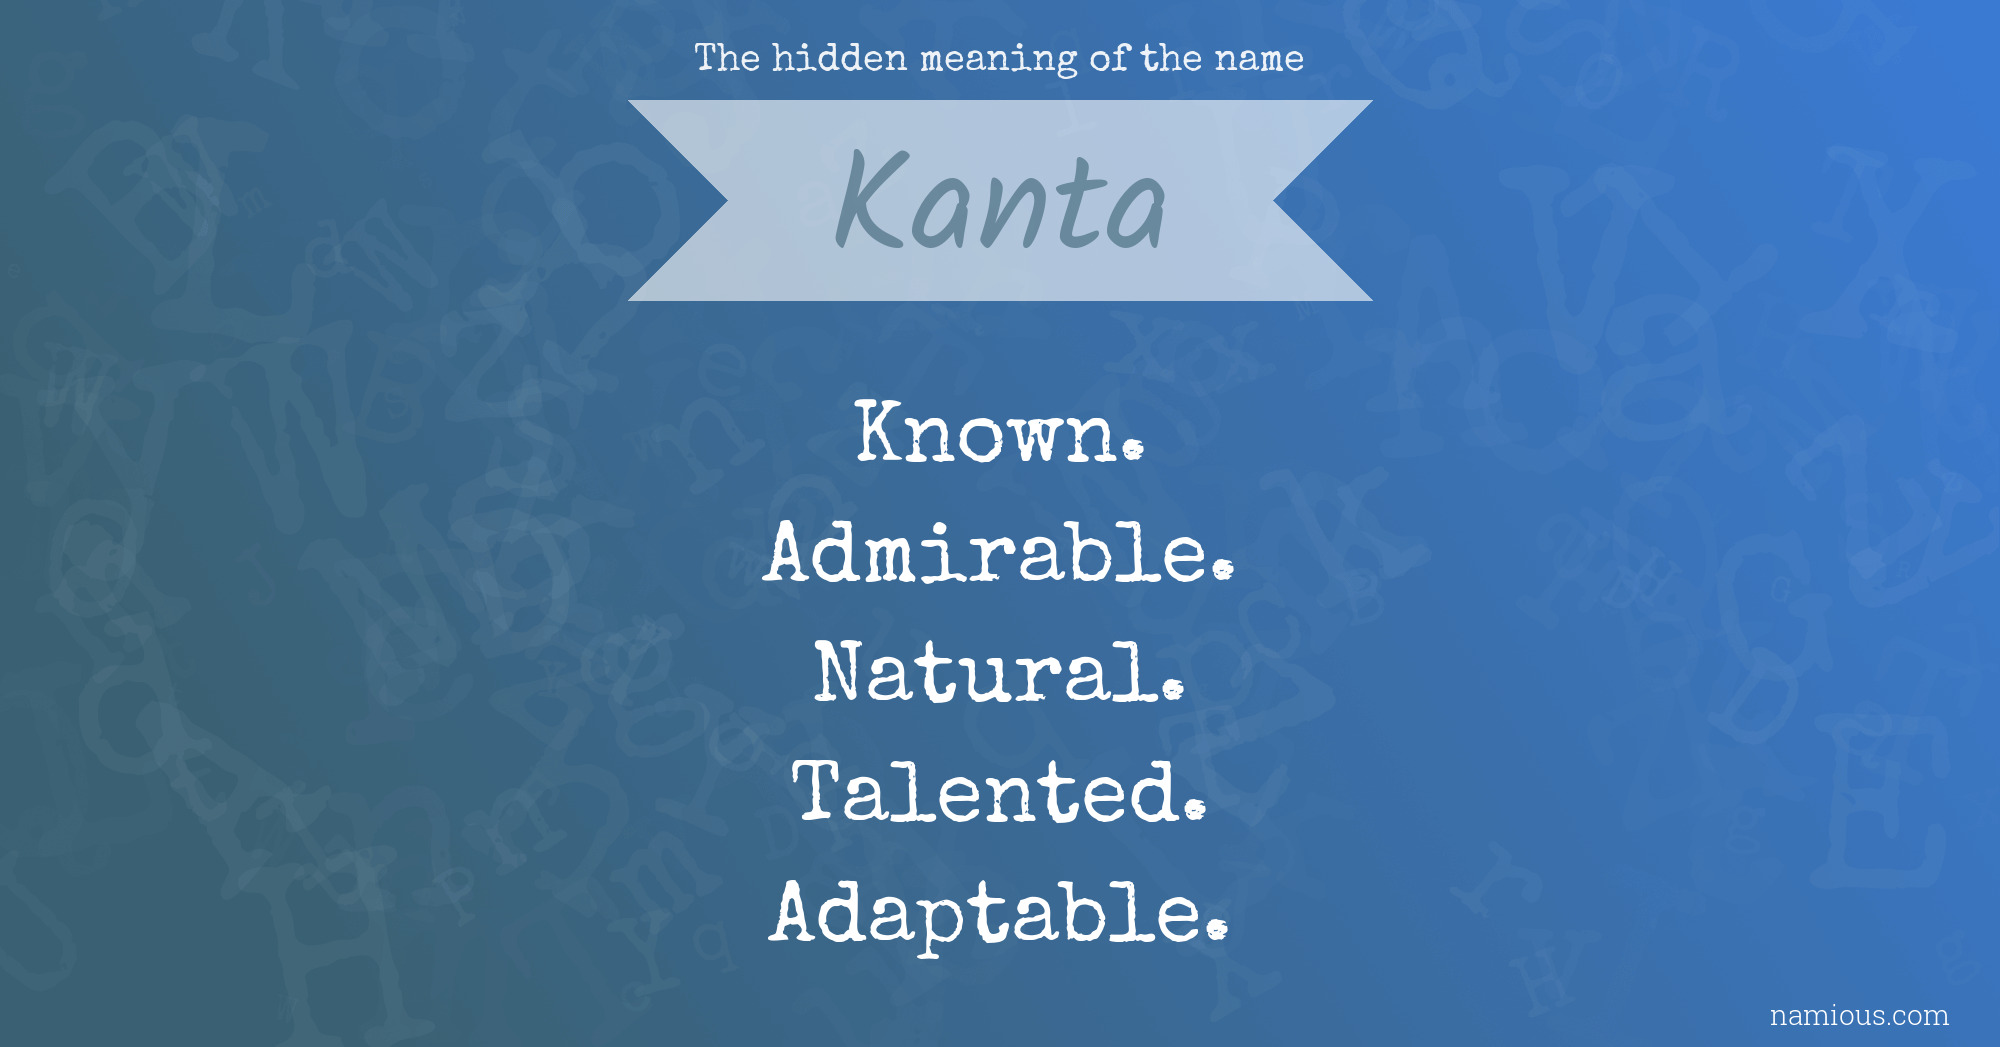 the-hidden-meaning-of-the-name-kanta-namious